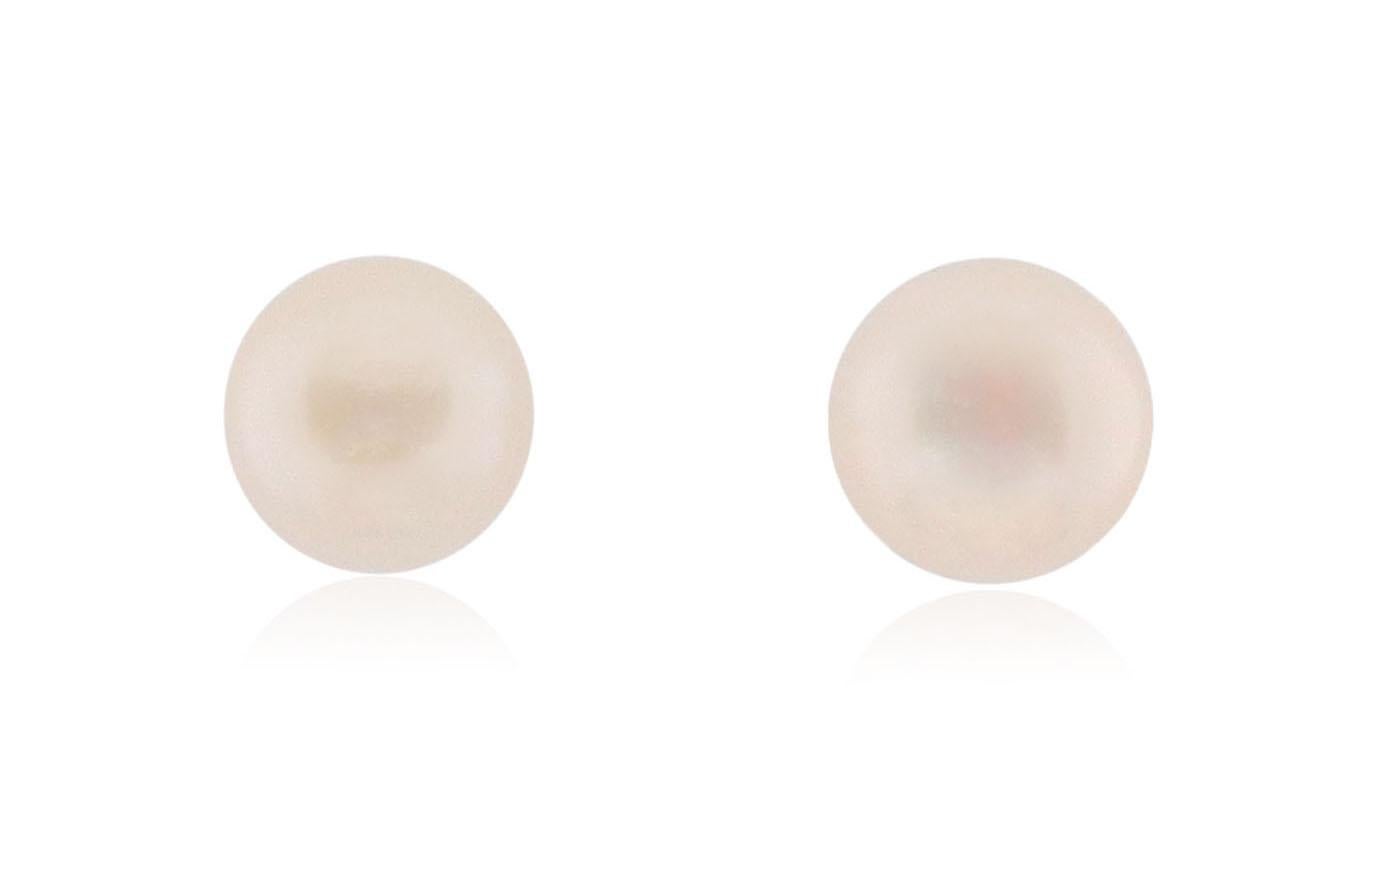 Material: Silver
Details: 2 White Round Freshwater Pearls measuring 8 millimeters each.
Push back studs

Fine one-of-a-kind craftsmanship meets incredible quality in this breathtaking piece of jewelry.